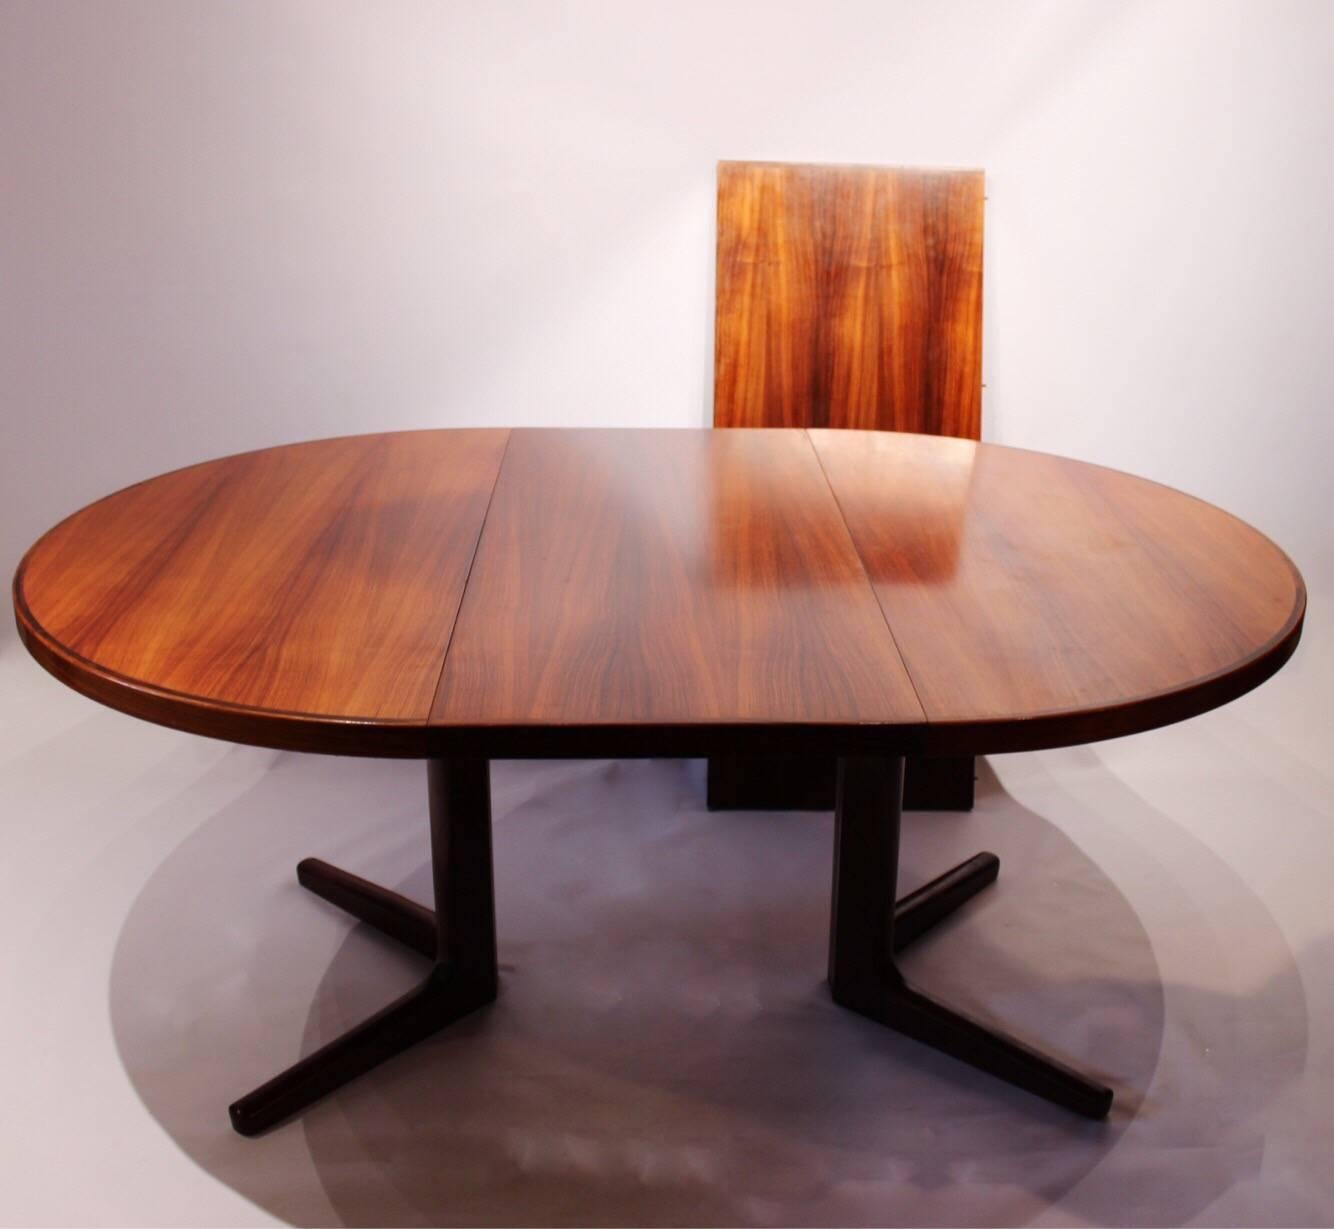 Round dining table in rosewood with two extension leaves of Danish design from Vejle furniture factory manufactured in the 1960s. The table is in great vintage condition.
Two extension leaves of 50 cm each.